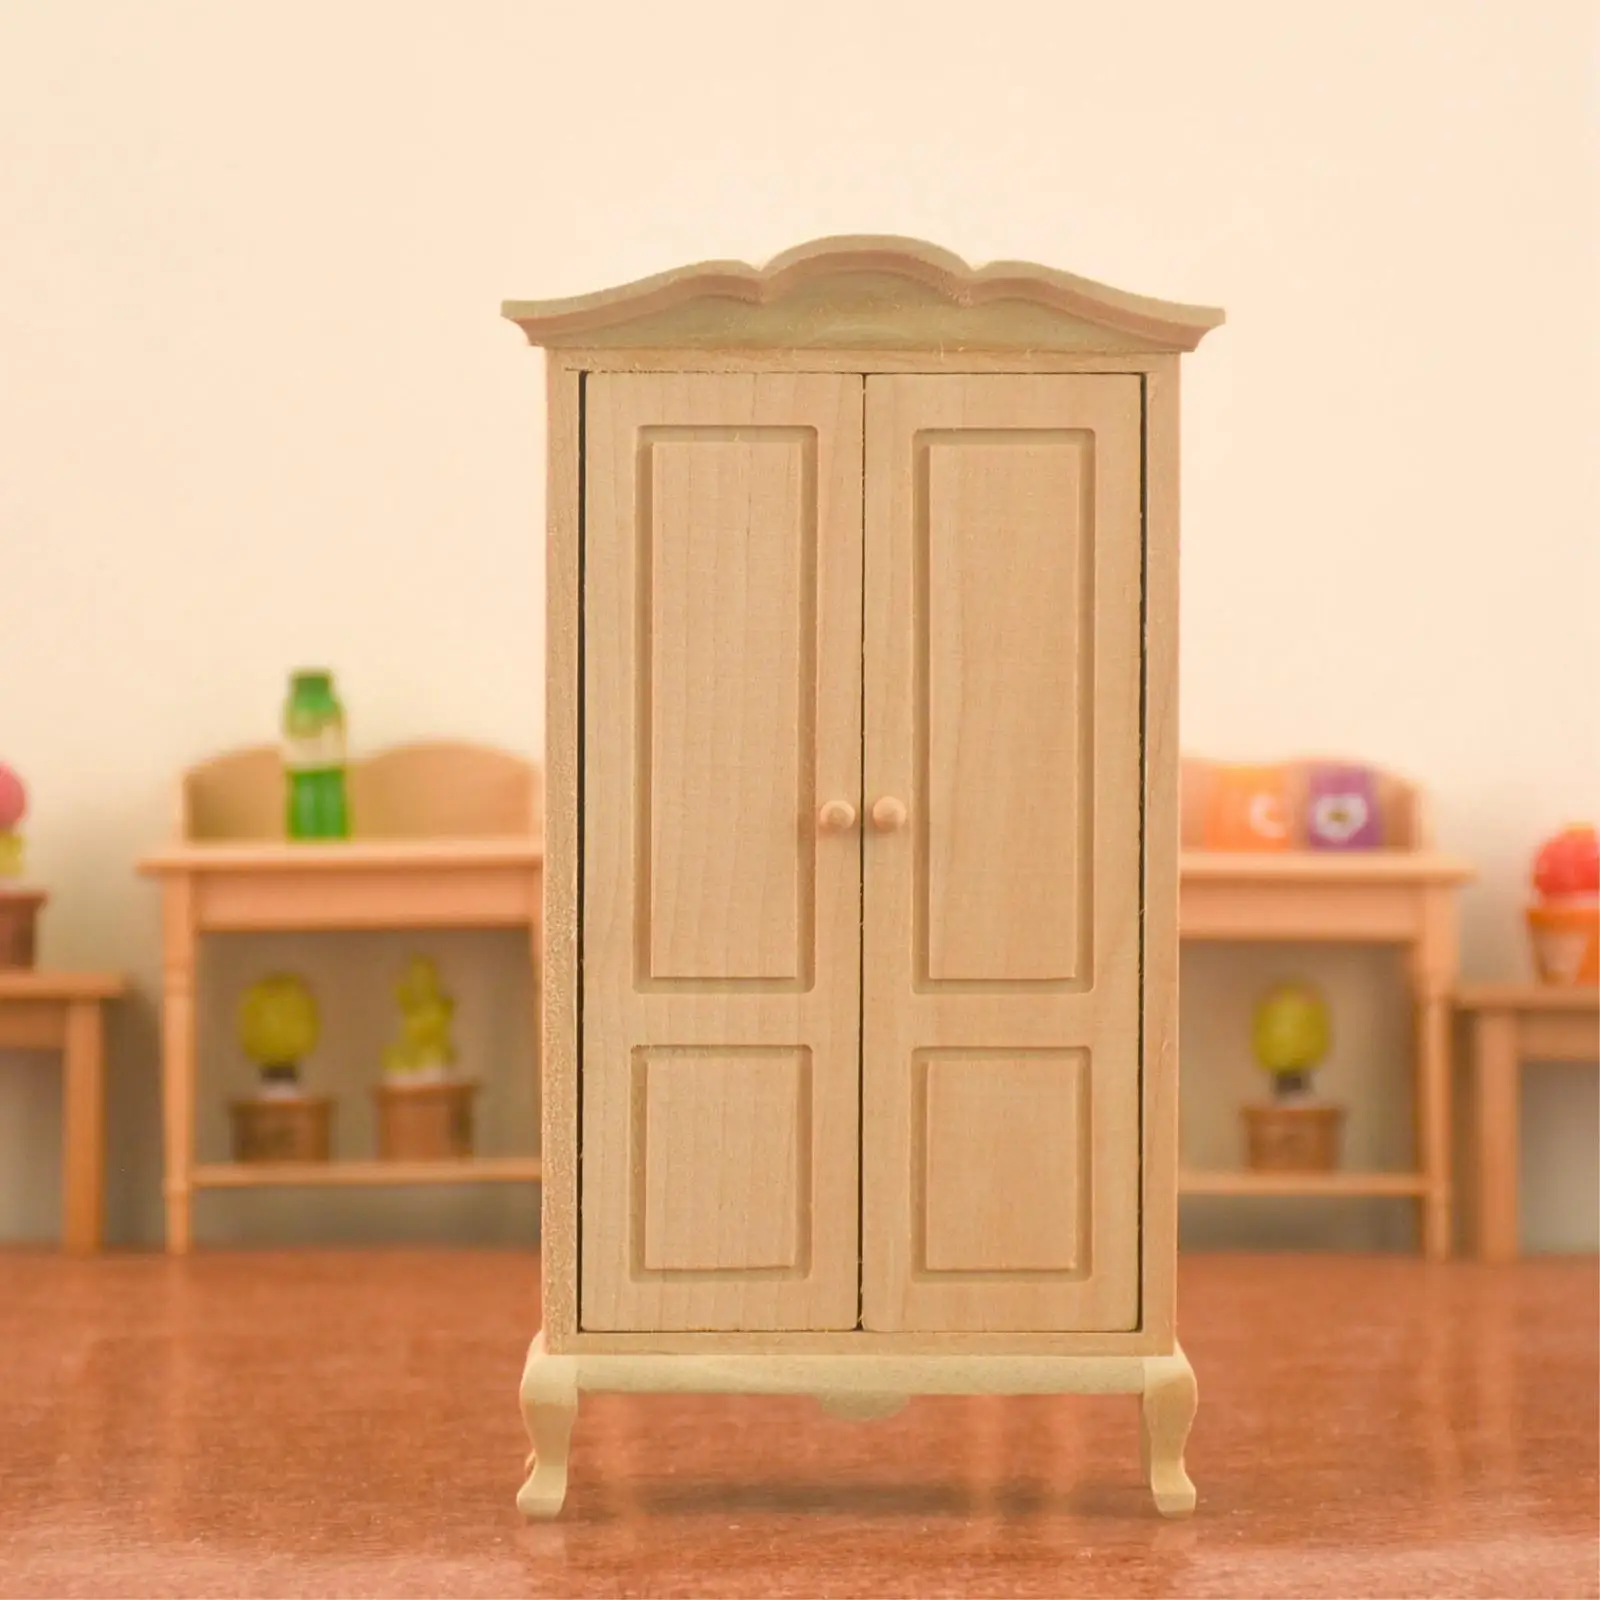 Exquisite Wardrobe 1:12 Dollhouse Miniature Living Room Furniture Life Scene Model Toy Bedroom Ornaments